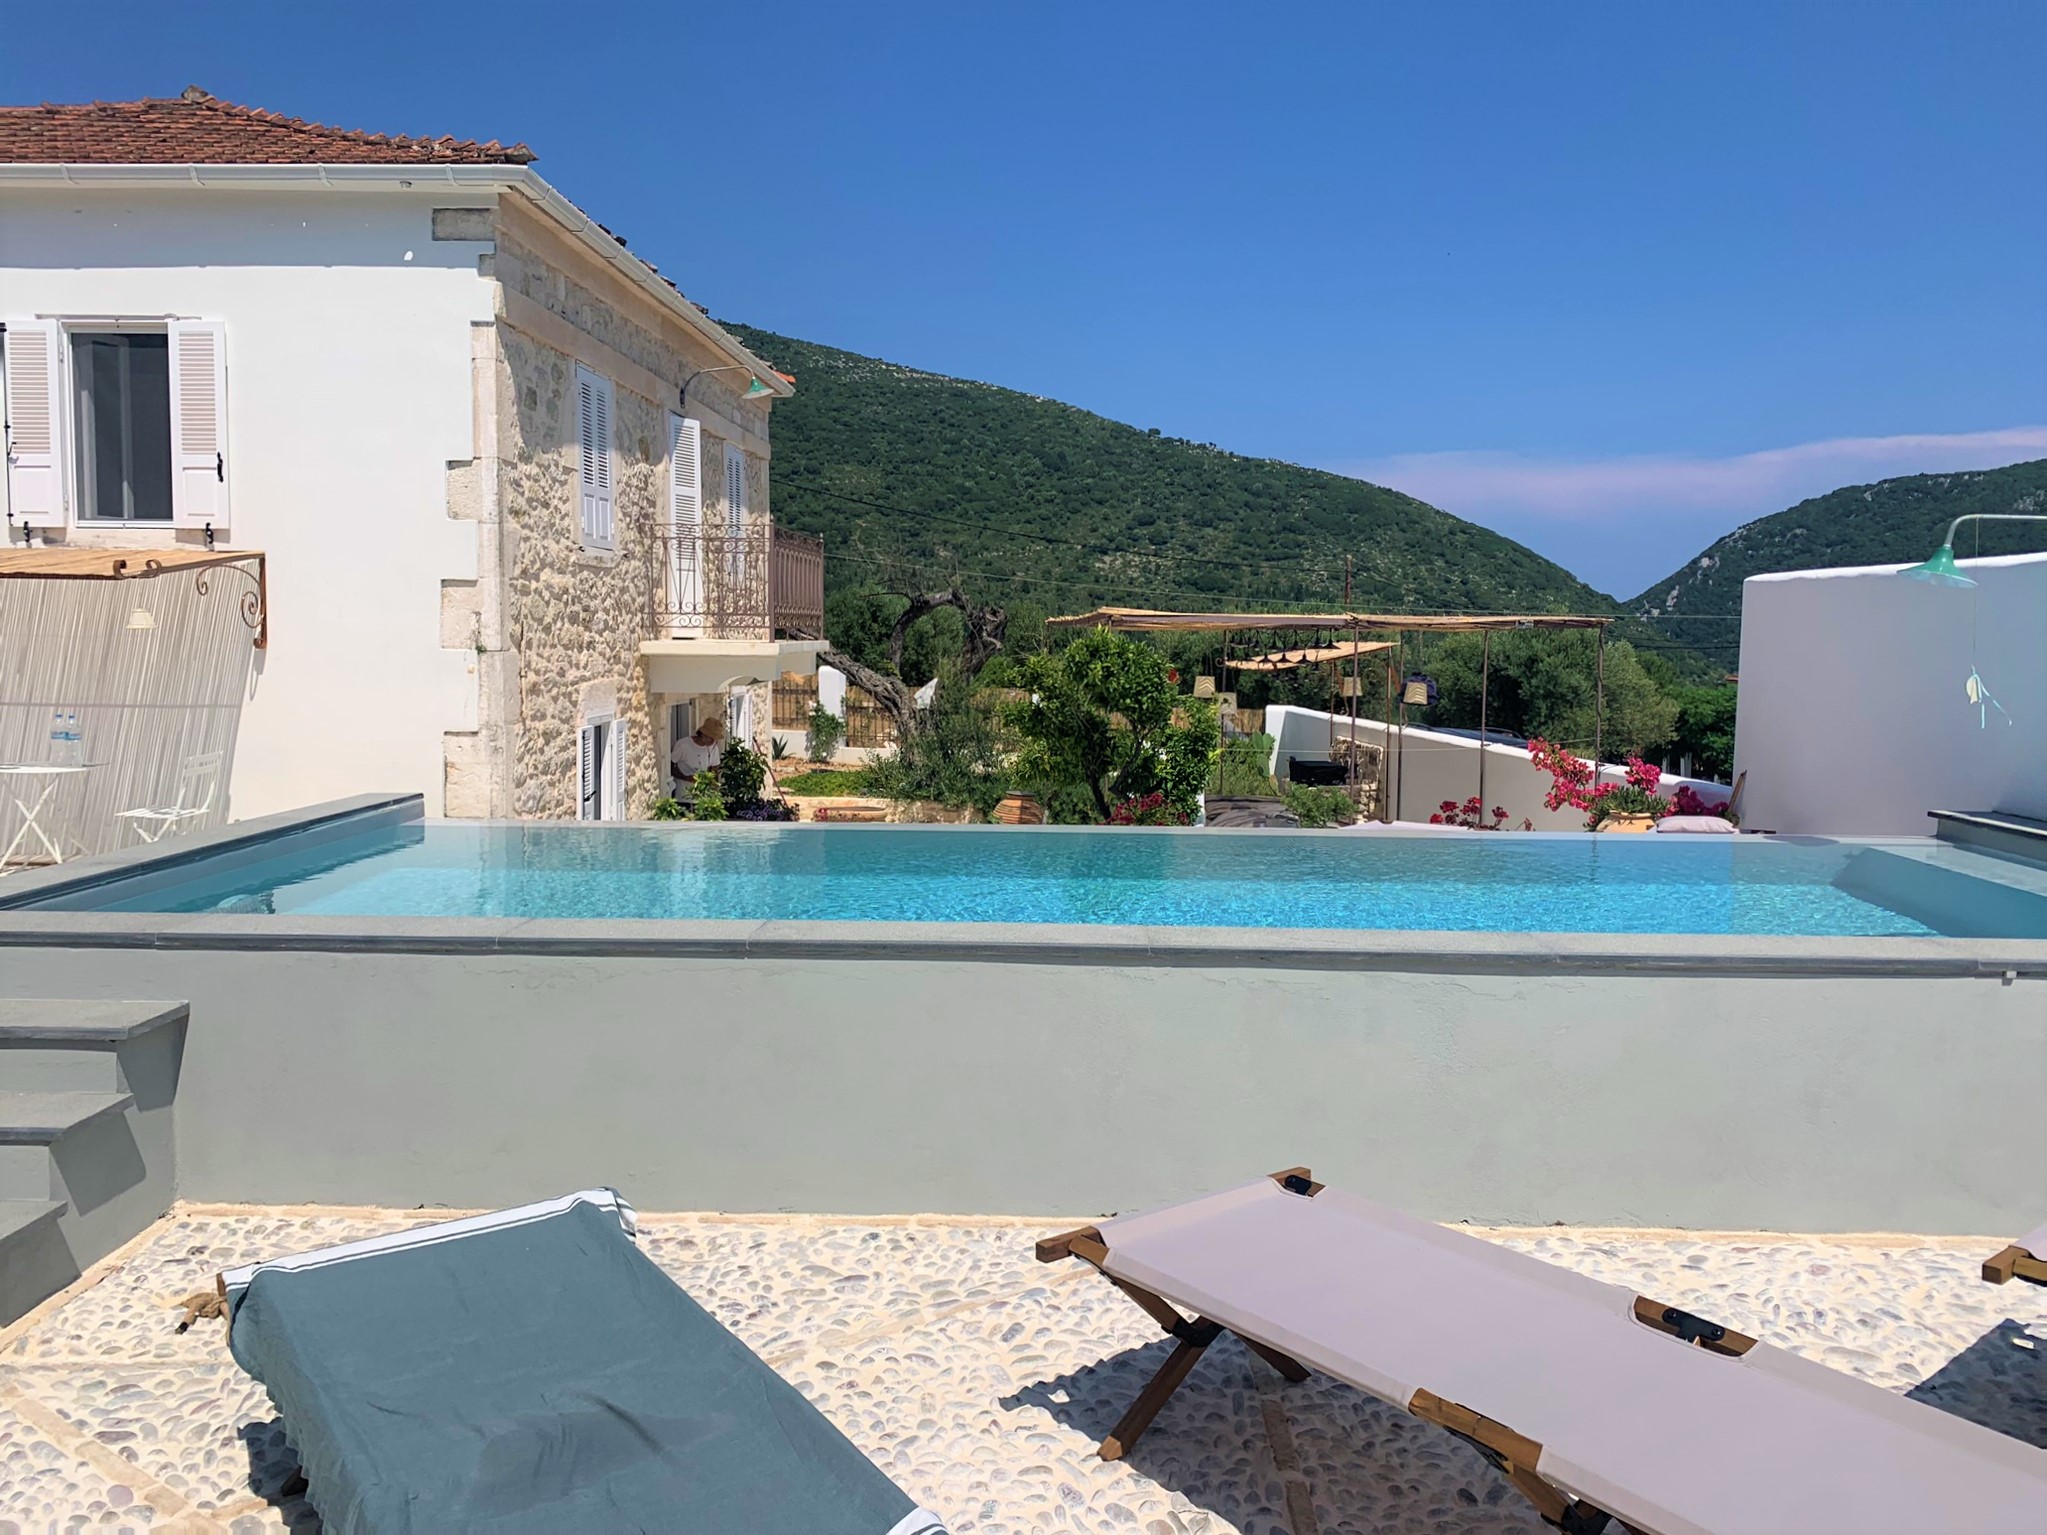 Swimming pool of villa for rent on Ithaca Greece, Lahos